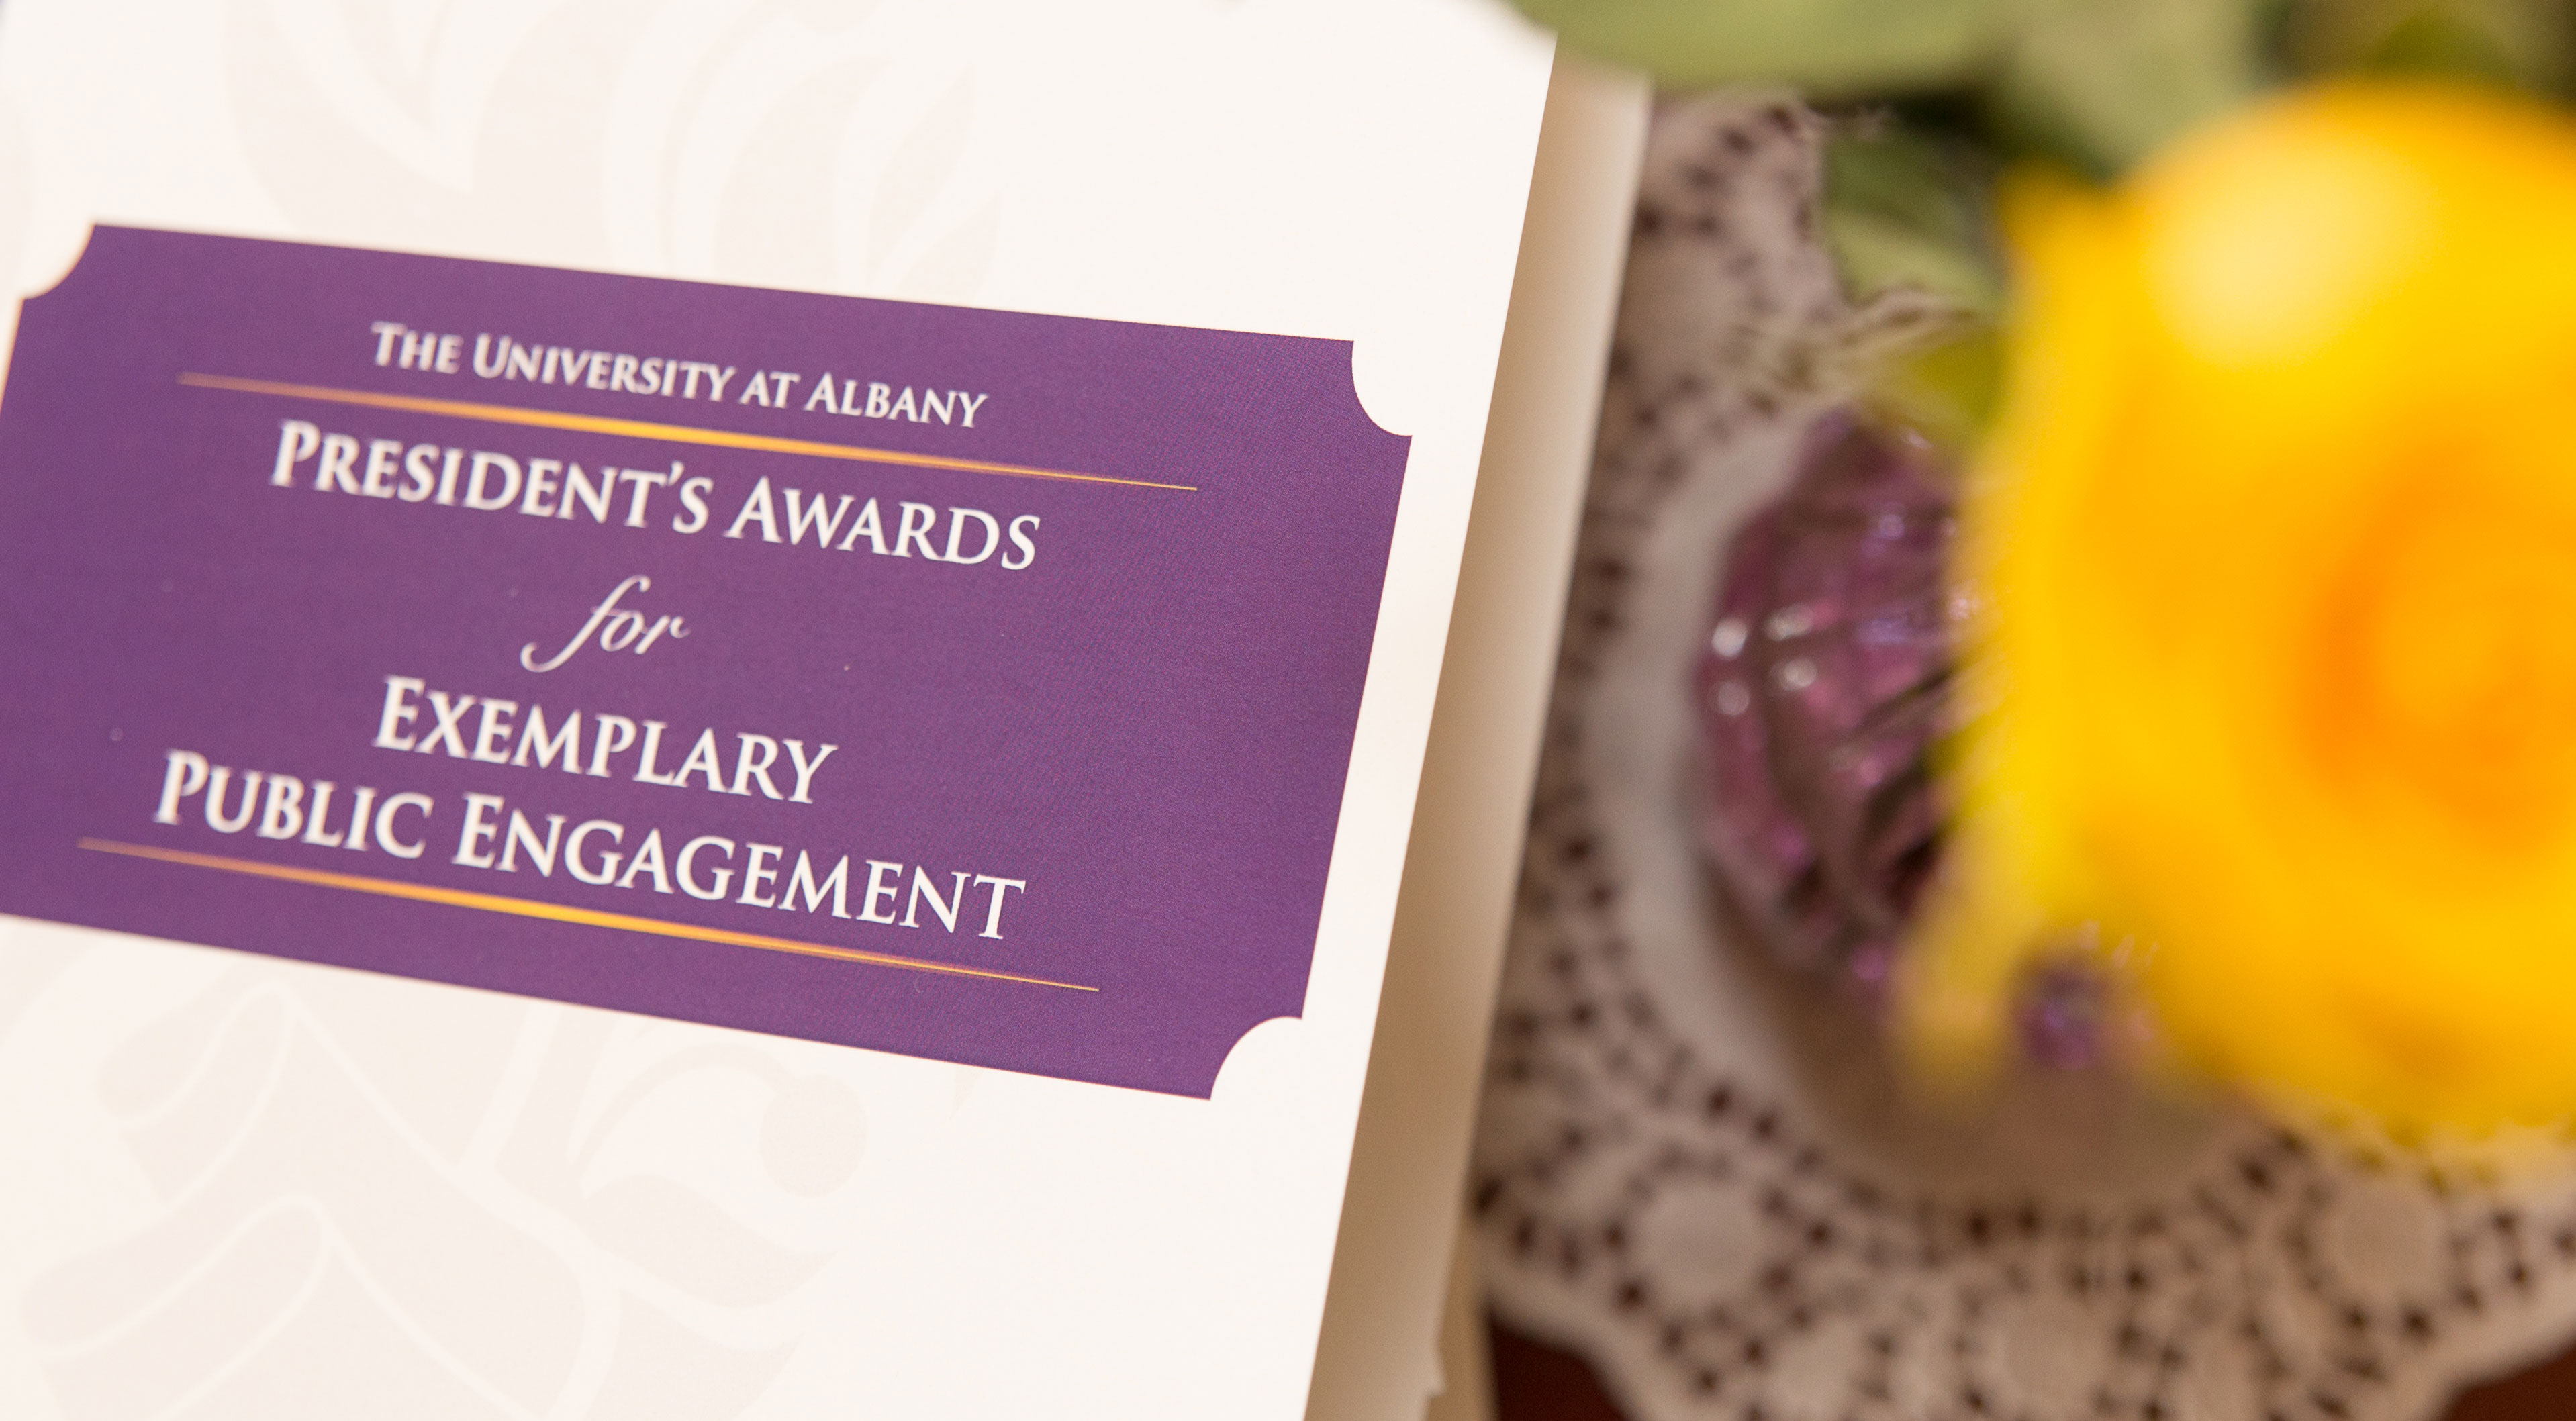 A white and purple program with the words "The University at Albany President's Awards for Exemplary Public Engagement" sits beside a yellow rose in a vase